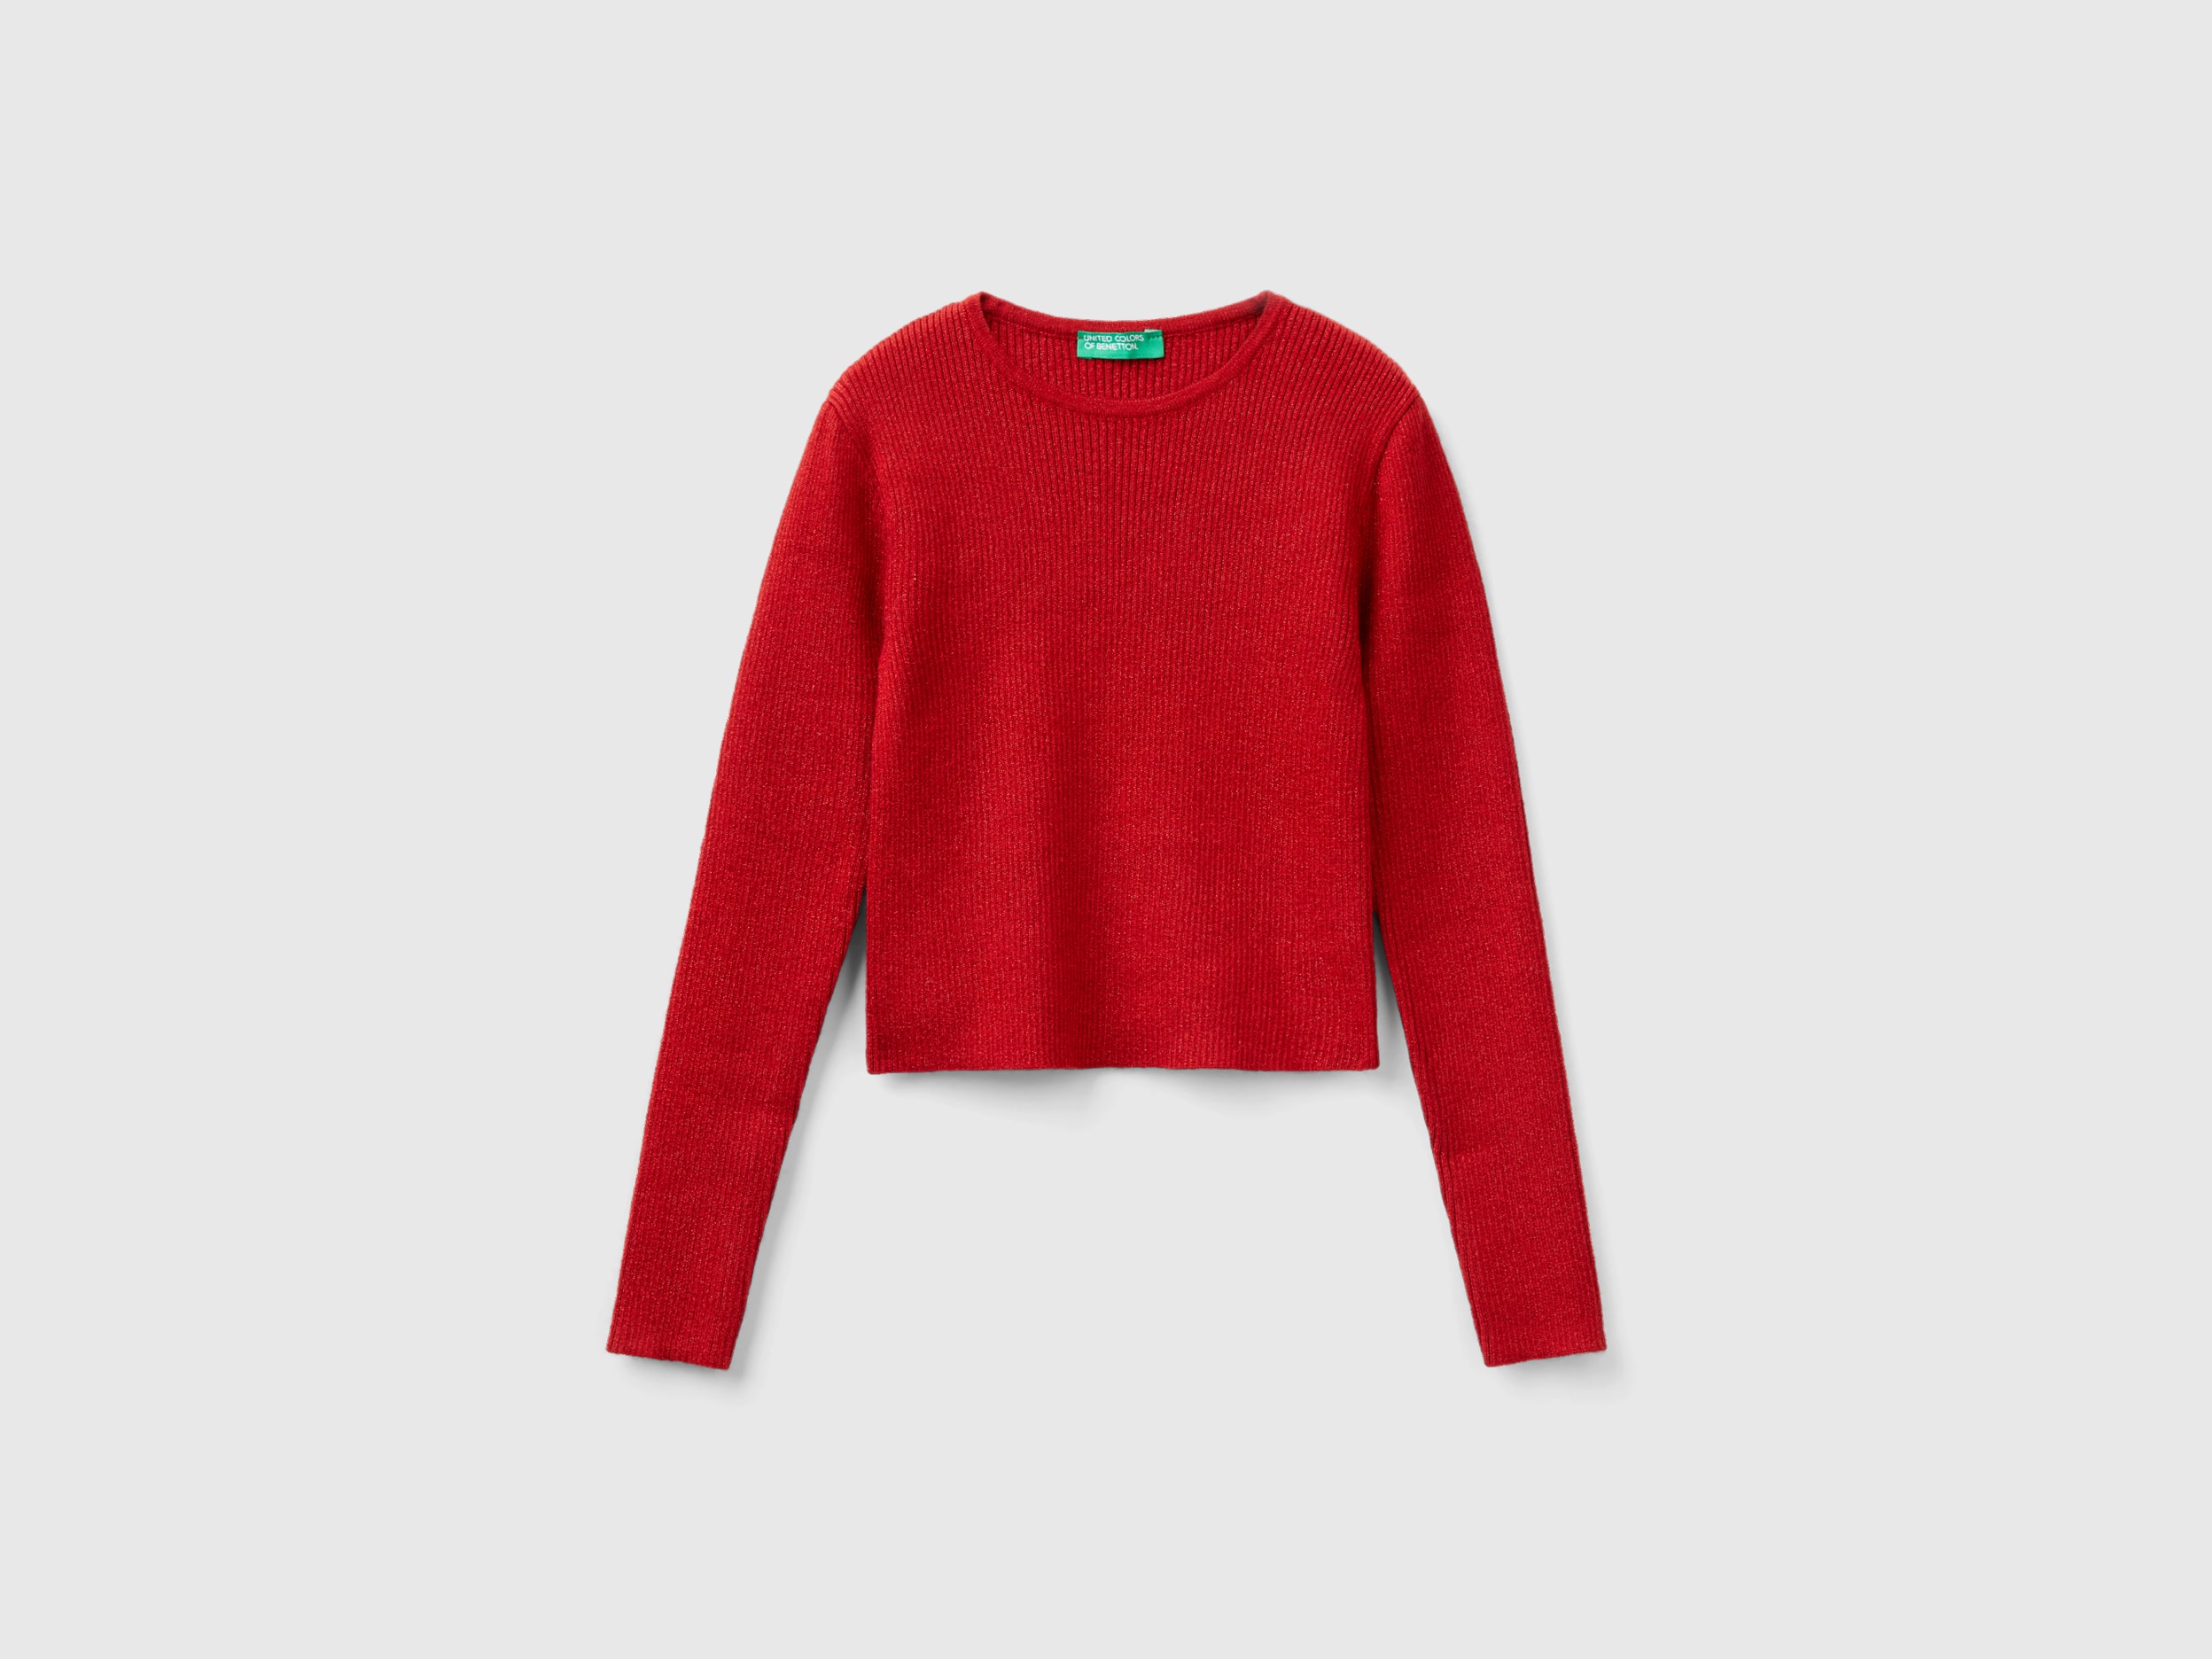 Benetton, Sweater With Lurex, size M, Red, Kids